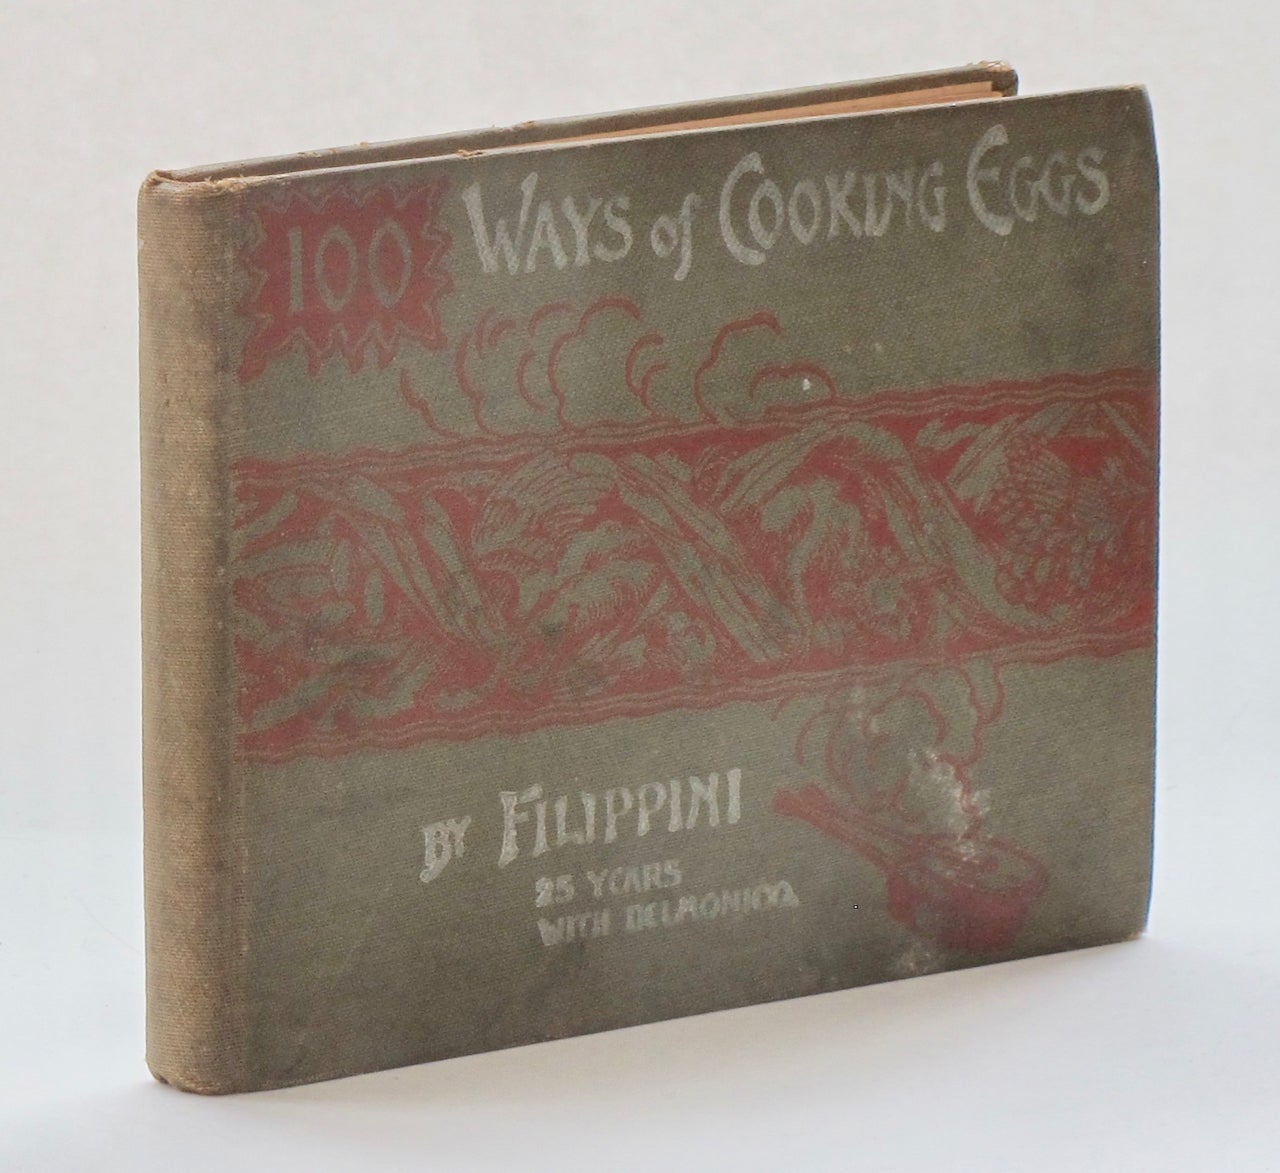 Item #5021 One Hundred Ways of Cooking Eggs, by Filippini, 25 Years with Delmonico. Filippini, Alexander.